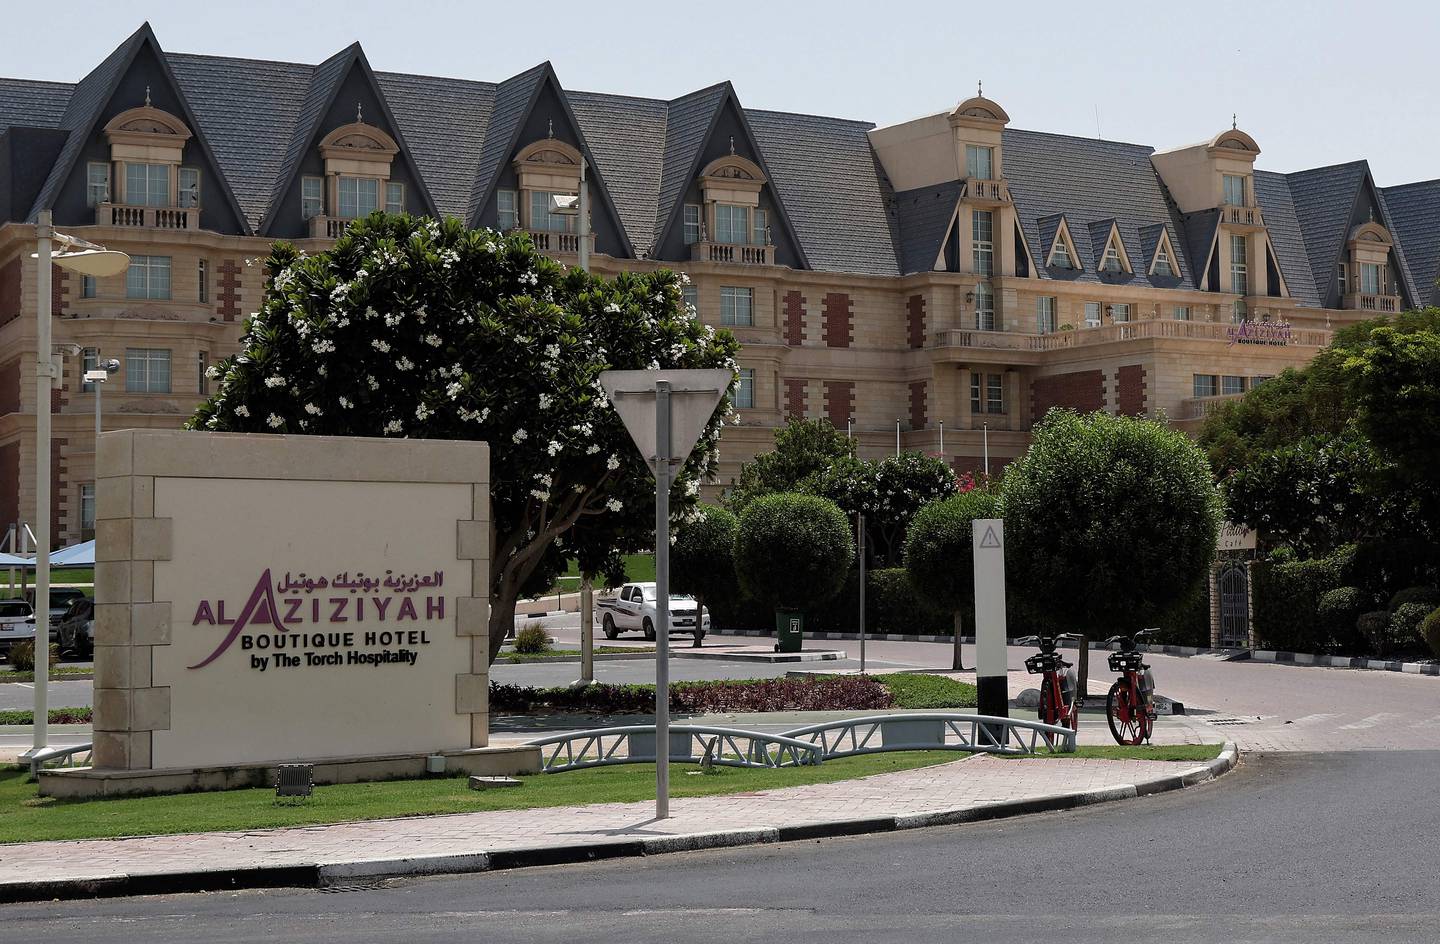 Al Aziziyah Boutique Hotel is where the Qatar national team will be staying during the tournament. AFP